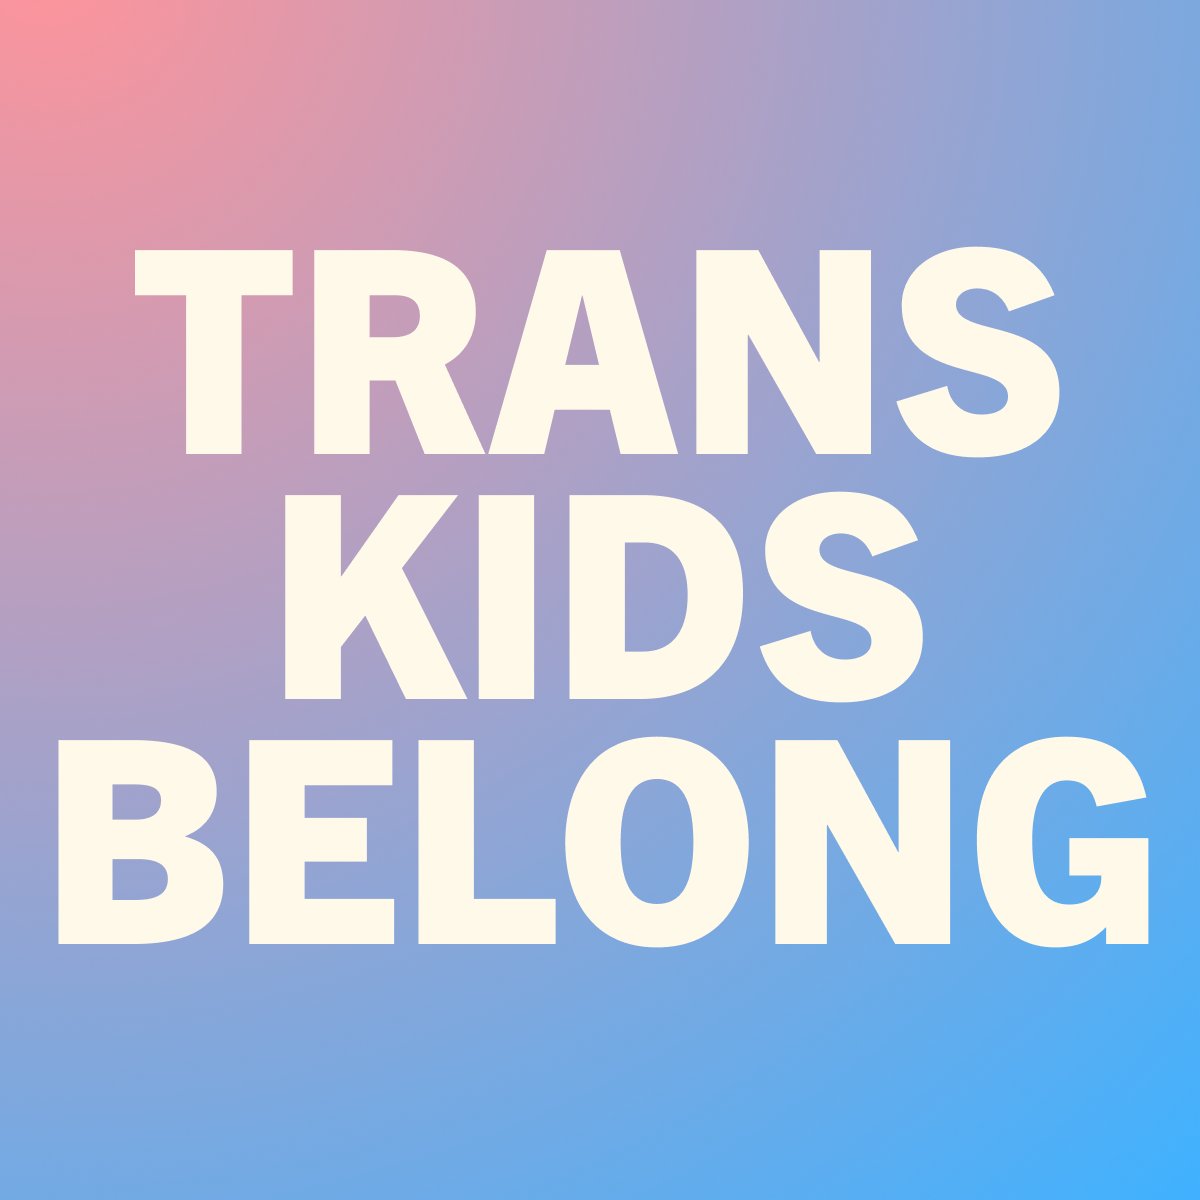 Trans kids belong everywhere, and we will stand with them.